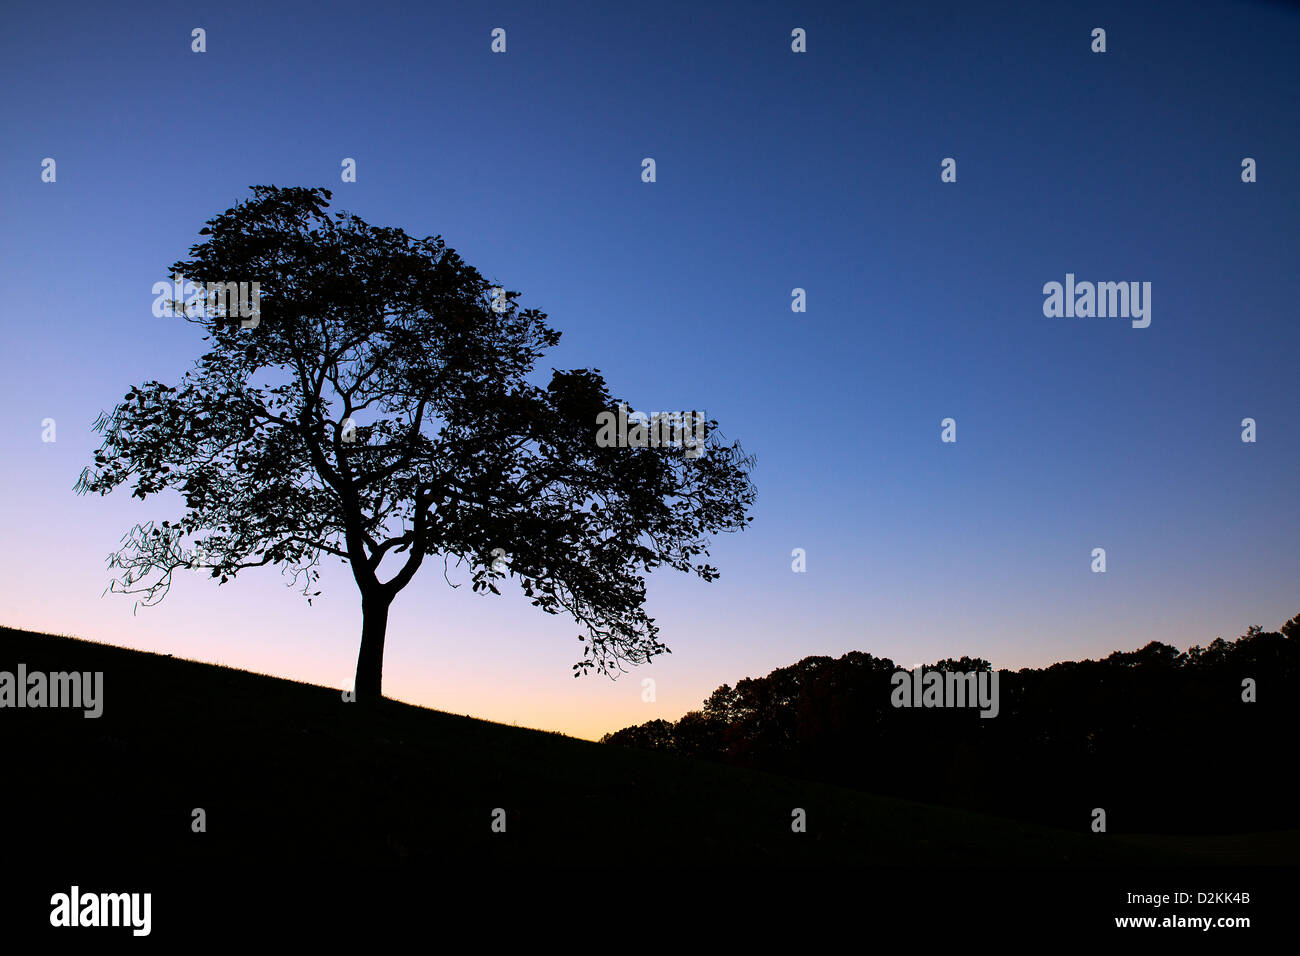 Silhouette of a tree at sunset, Delaware, USA Stock Photo